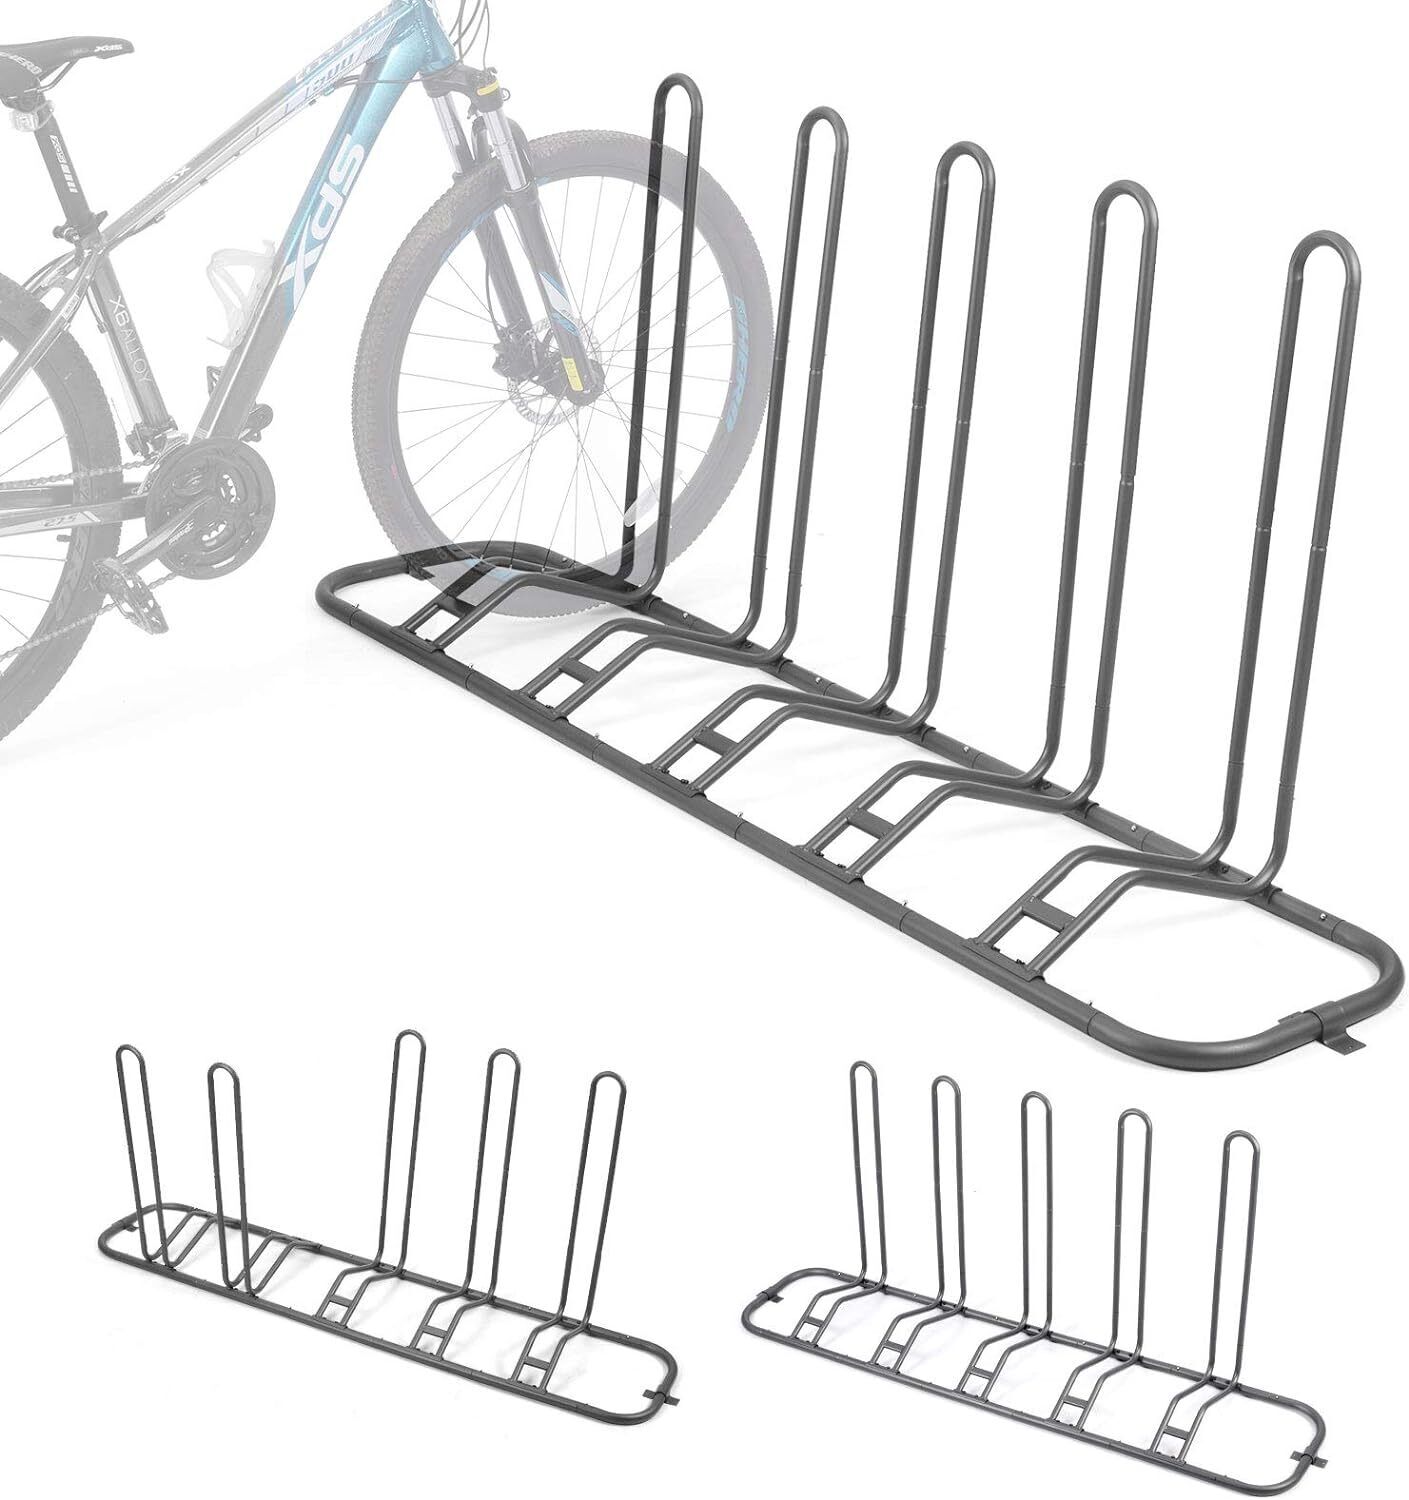 Bike Parking Stand, Bike Rack Bicycle Floor Parking Stand for 5 Bikes